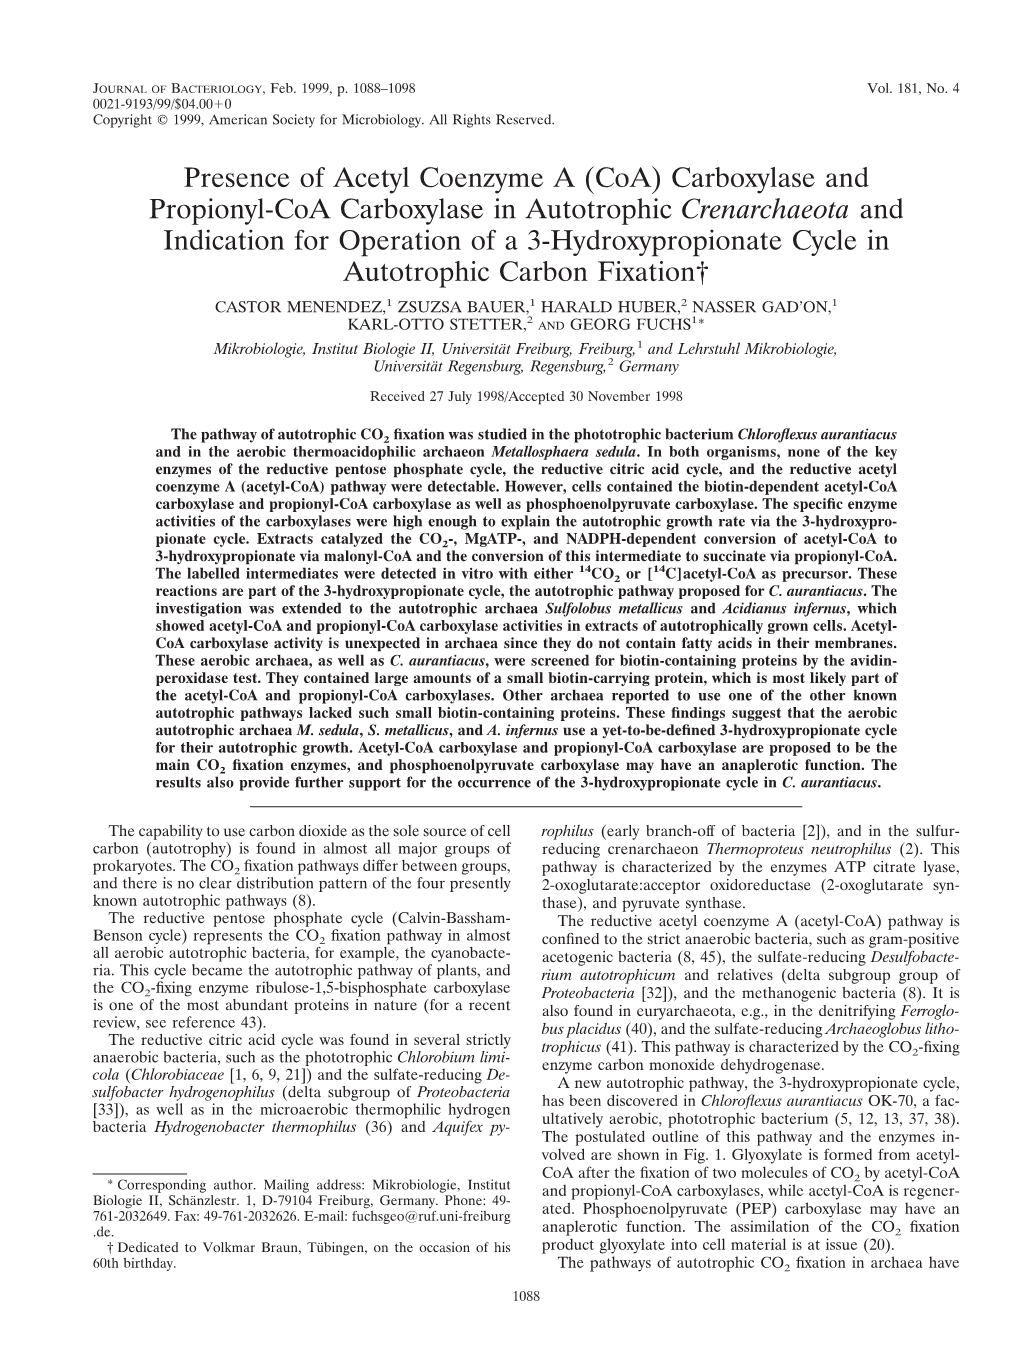 Presence of Acetyl Coenzyme a (Coa) Carboxylase and Propionyl